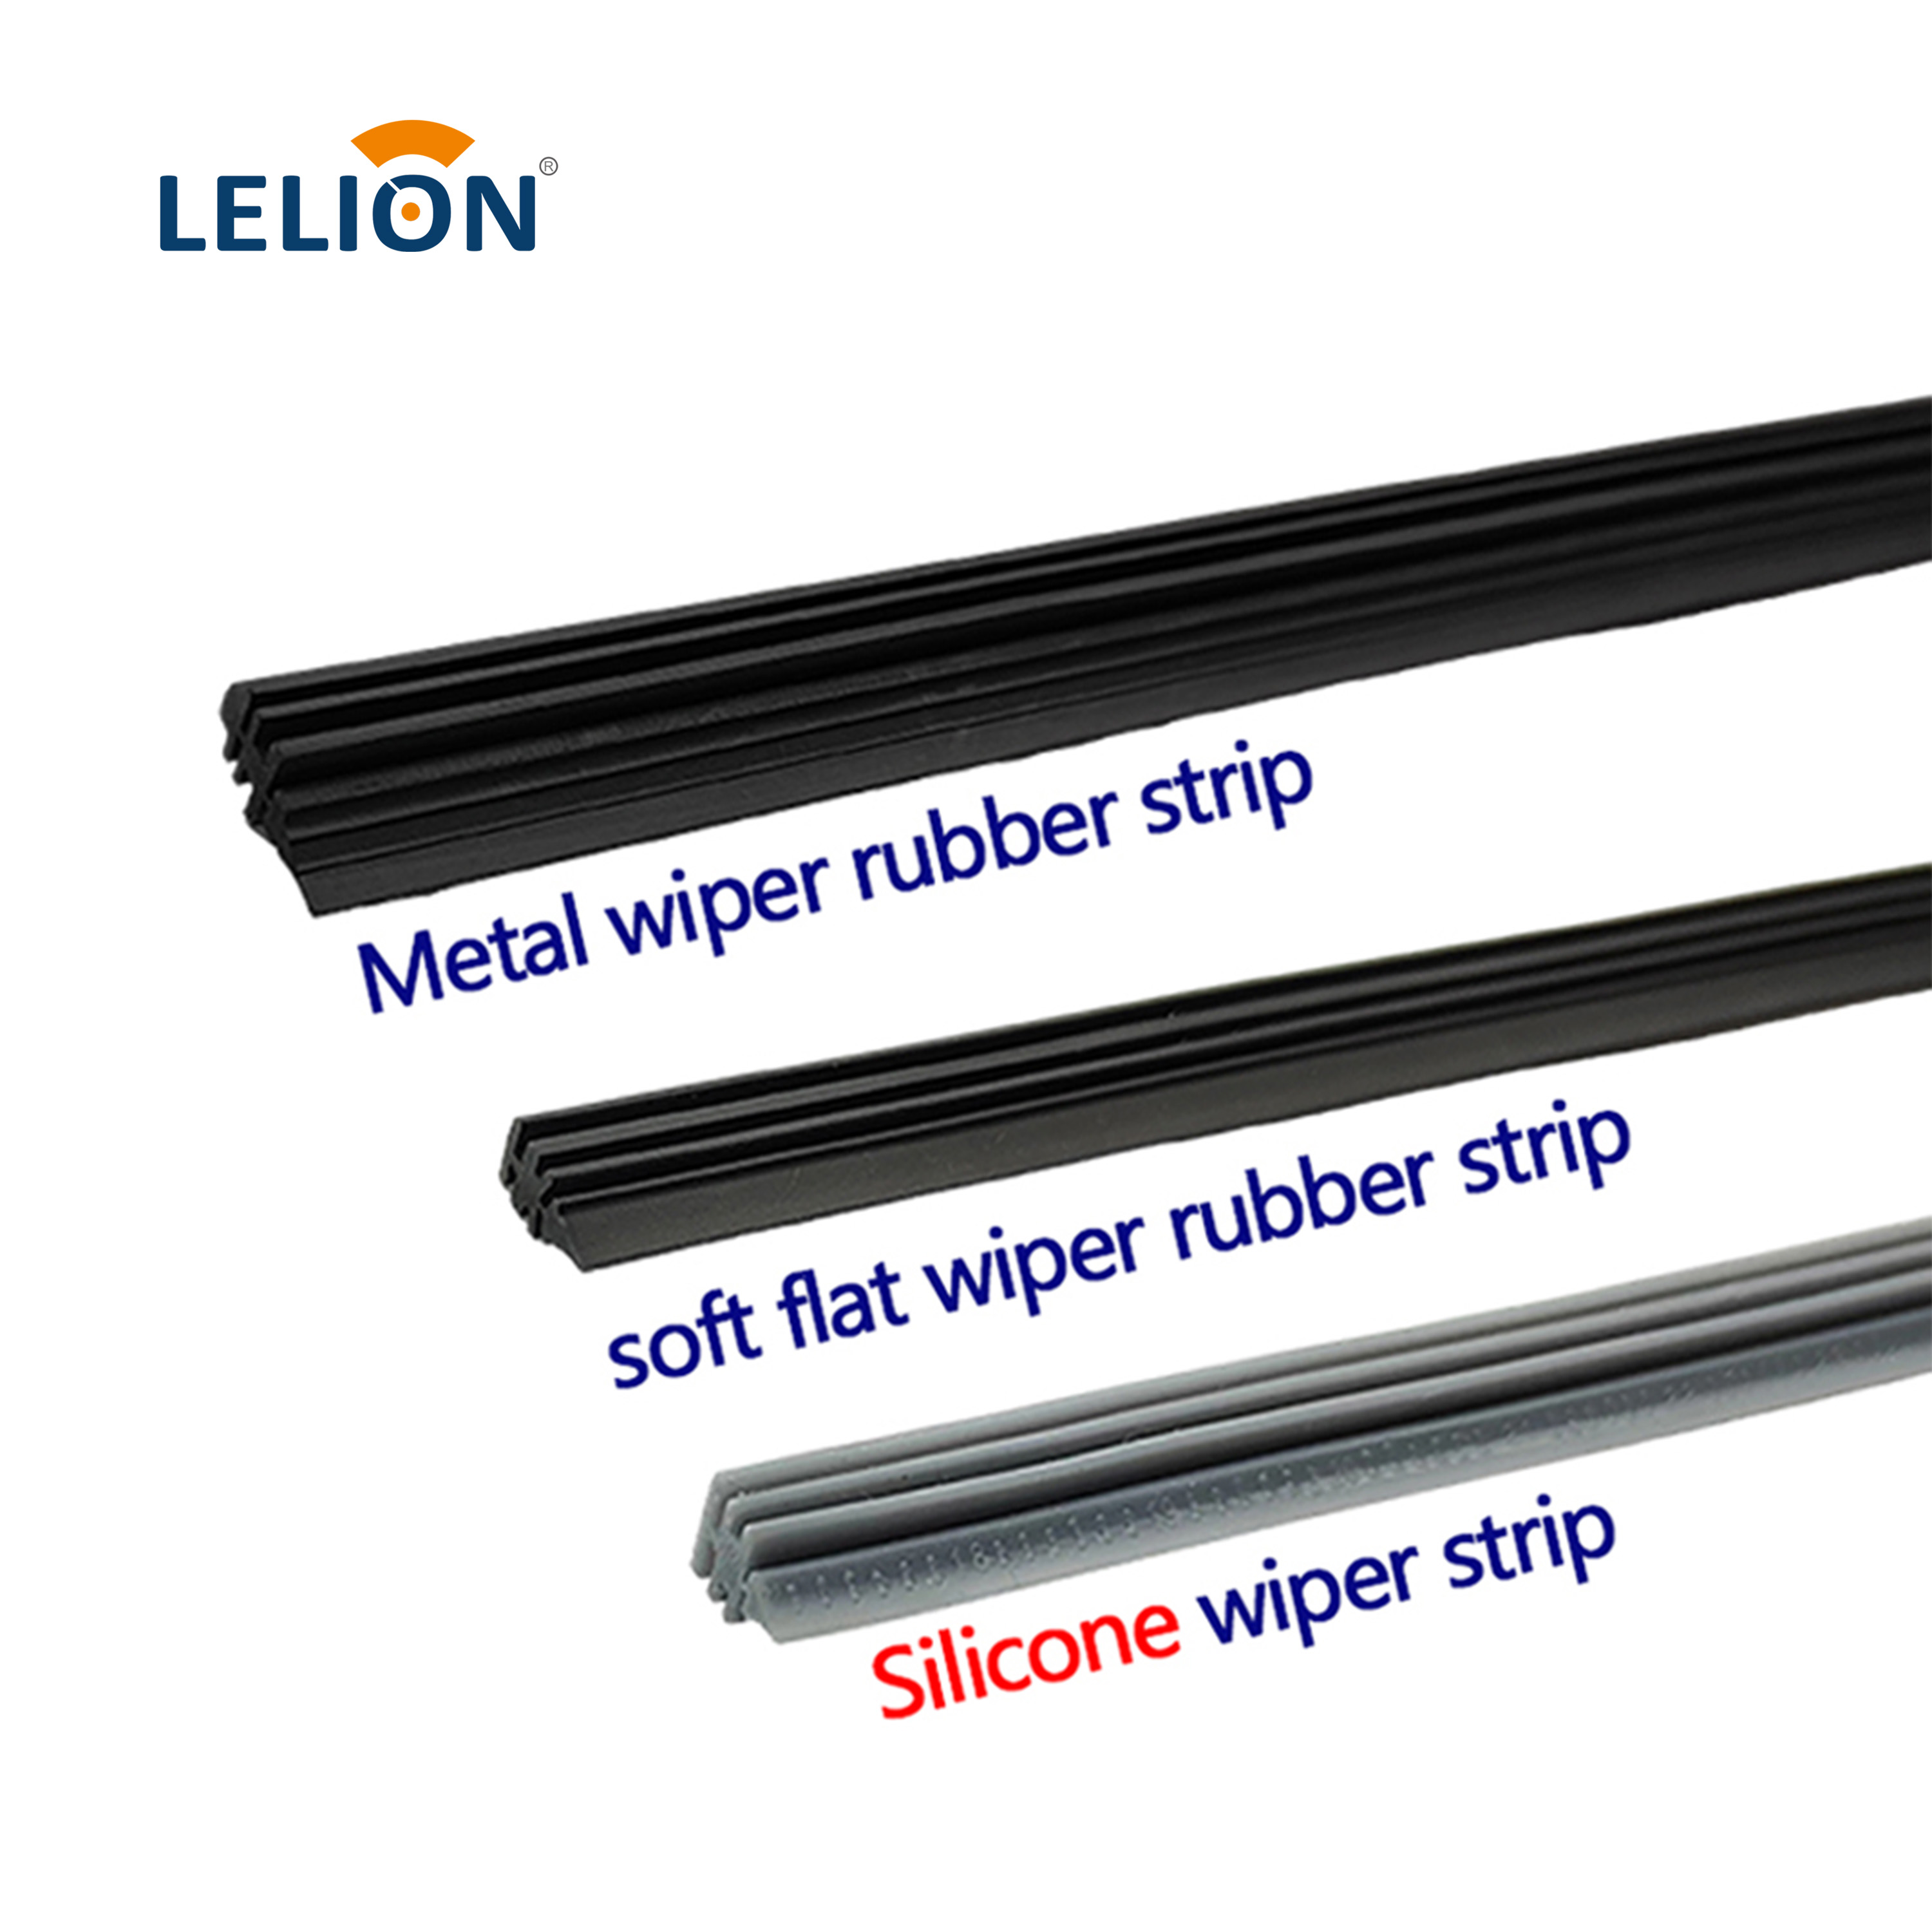 Lelion Silicone Rubber Strip/Refill & Natural Rubber Strip for Hybrid/Metal/Flat Wiper Blade